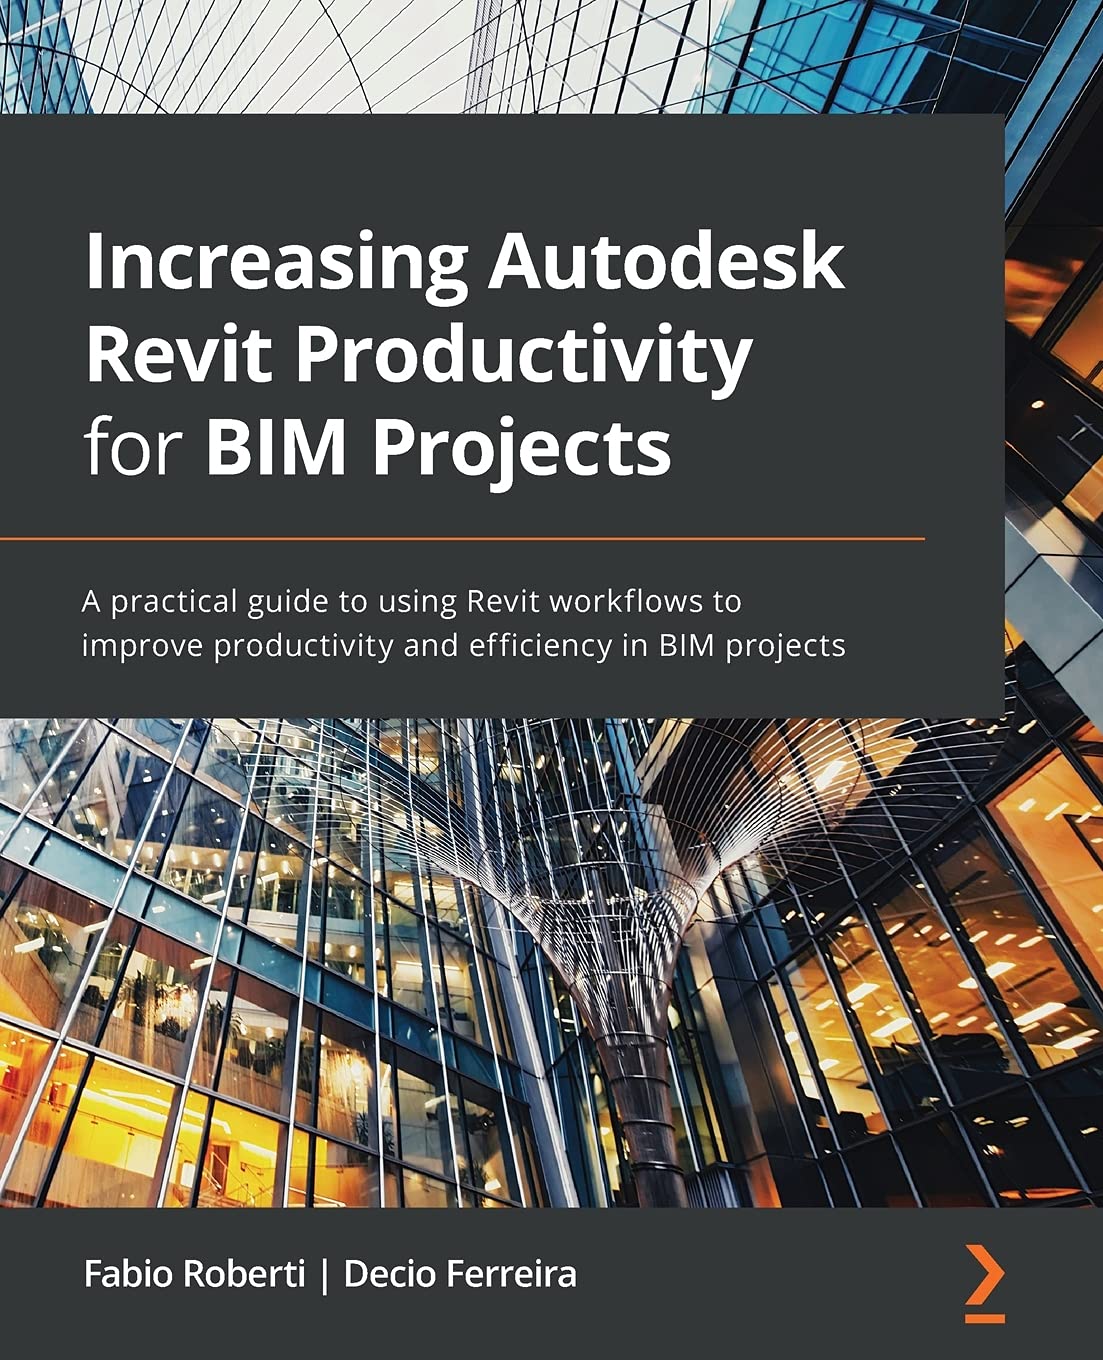 Increasing Autodesk Revit Productivity for BIM Projects: A practical guide to using Revit workflows to improve productivity and efficiency in BIM p...